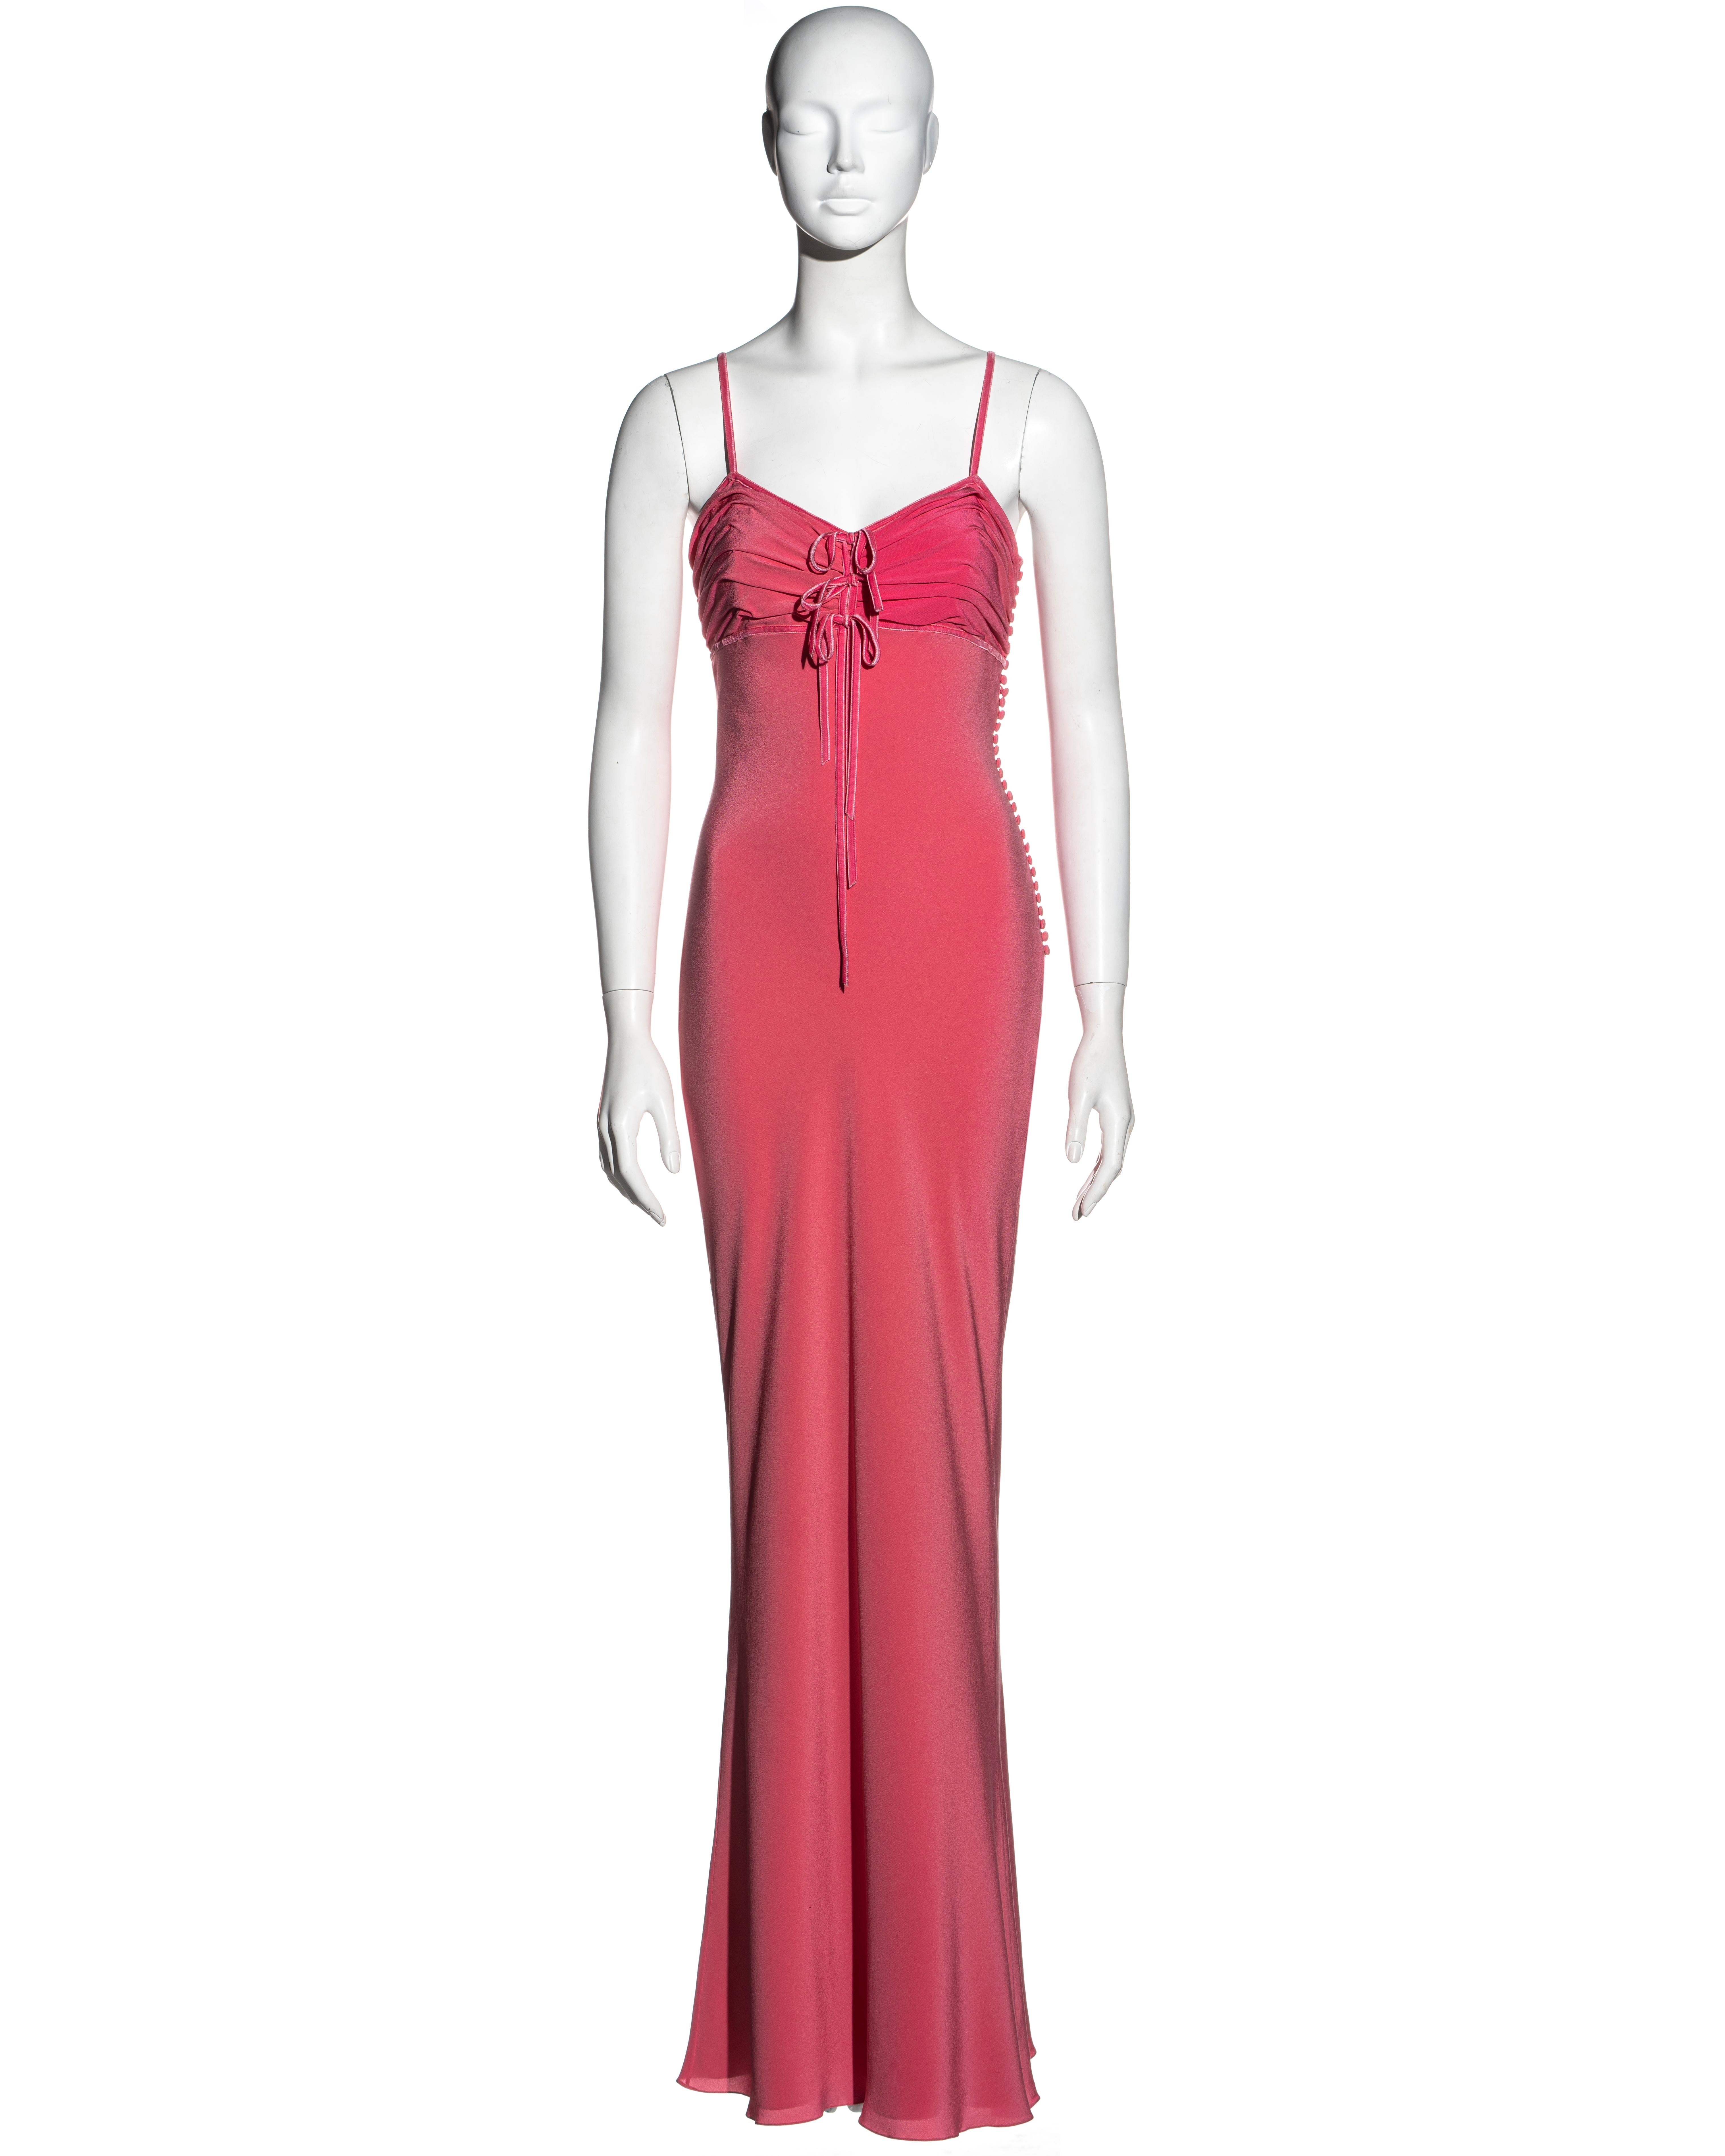 ▪ Christian Dior salmon pink silk maxi dress
▪ Designed by John Galliano 
▪ Pleated bust 
▪ Three velvet bow ties
▪ Velvet spaghetti straps 
▪ Fabric buttons at the side seam 
▪ FR 40 - UK 40 - US 8
▪ Spring-Summer 2006